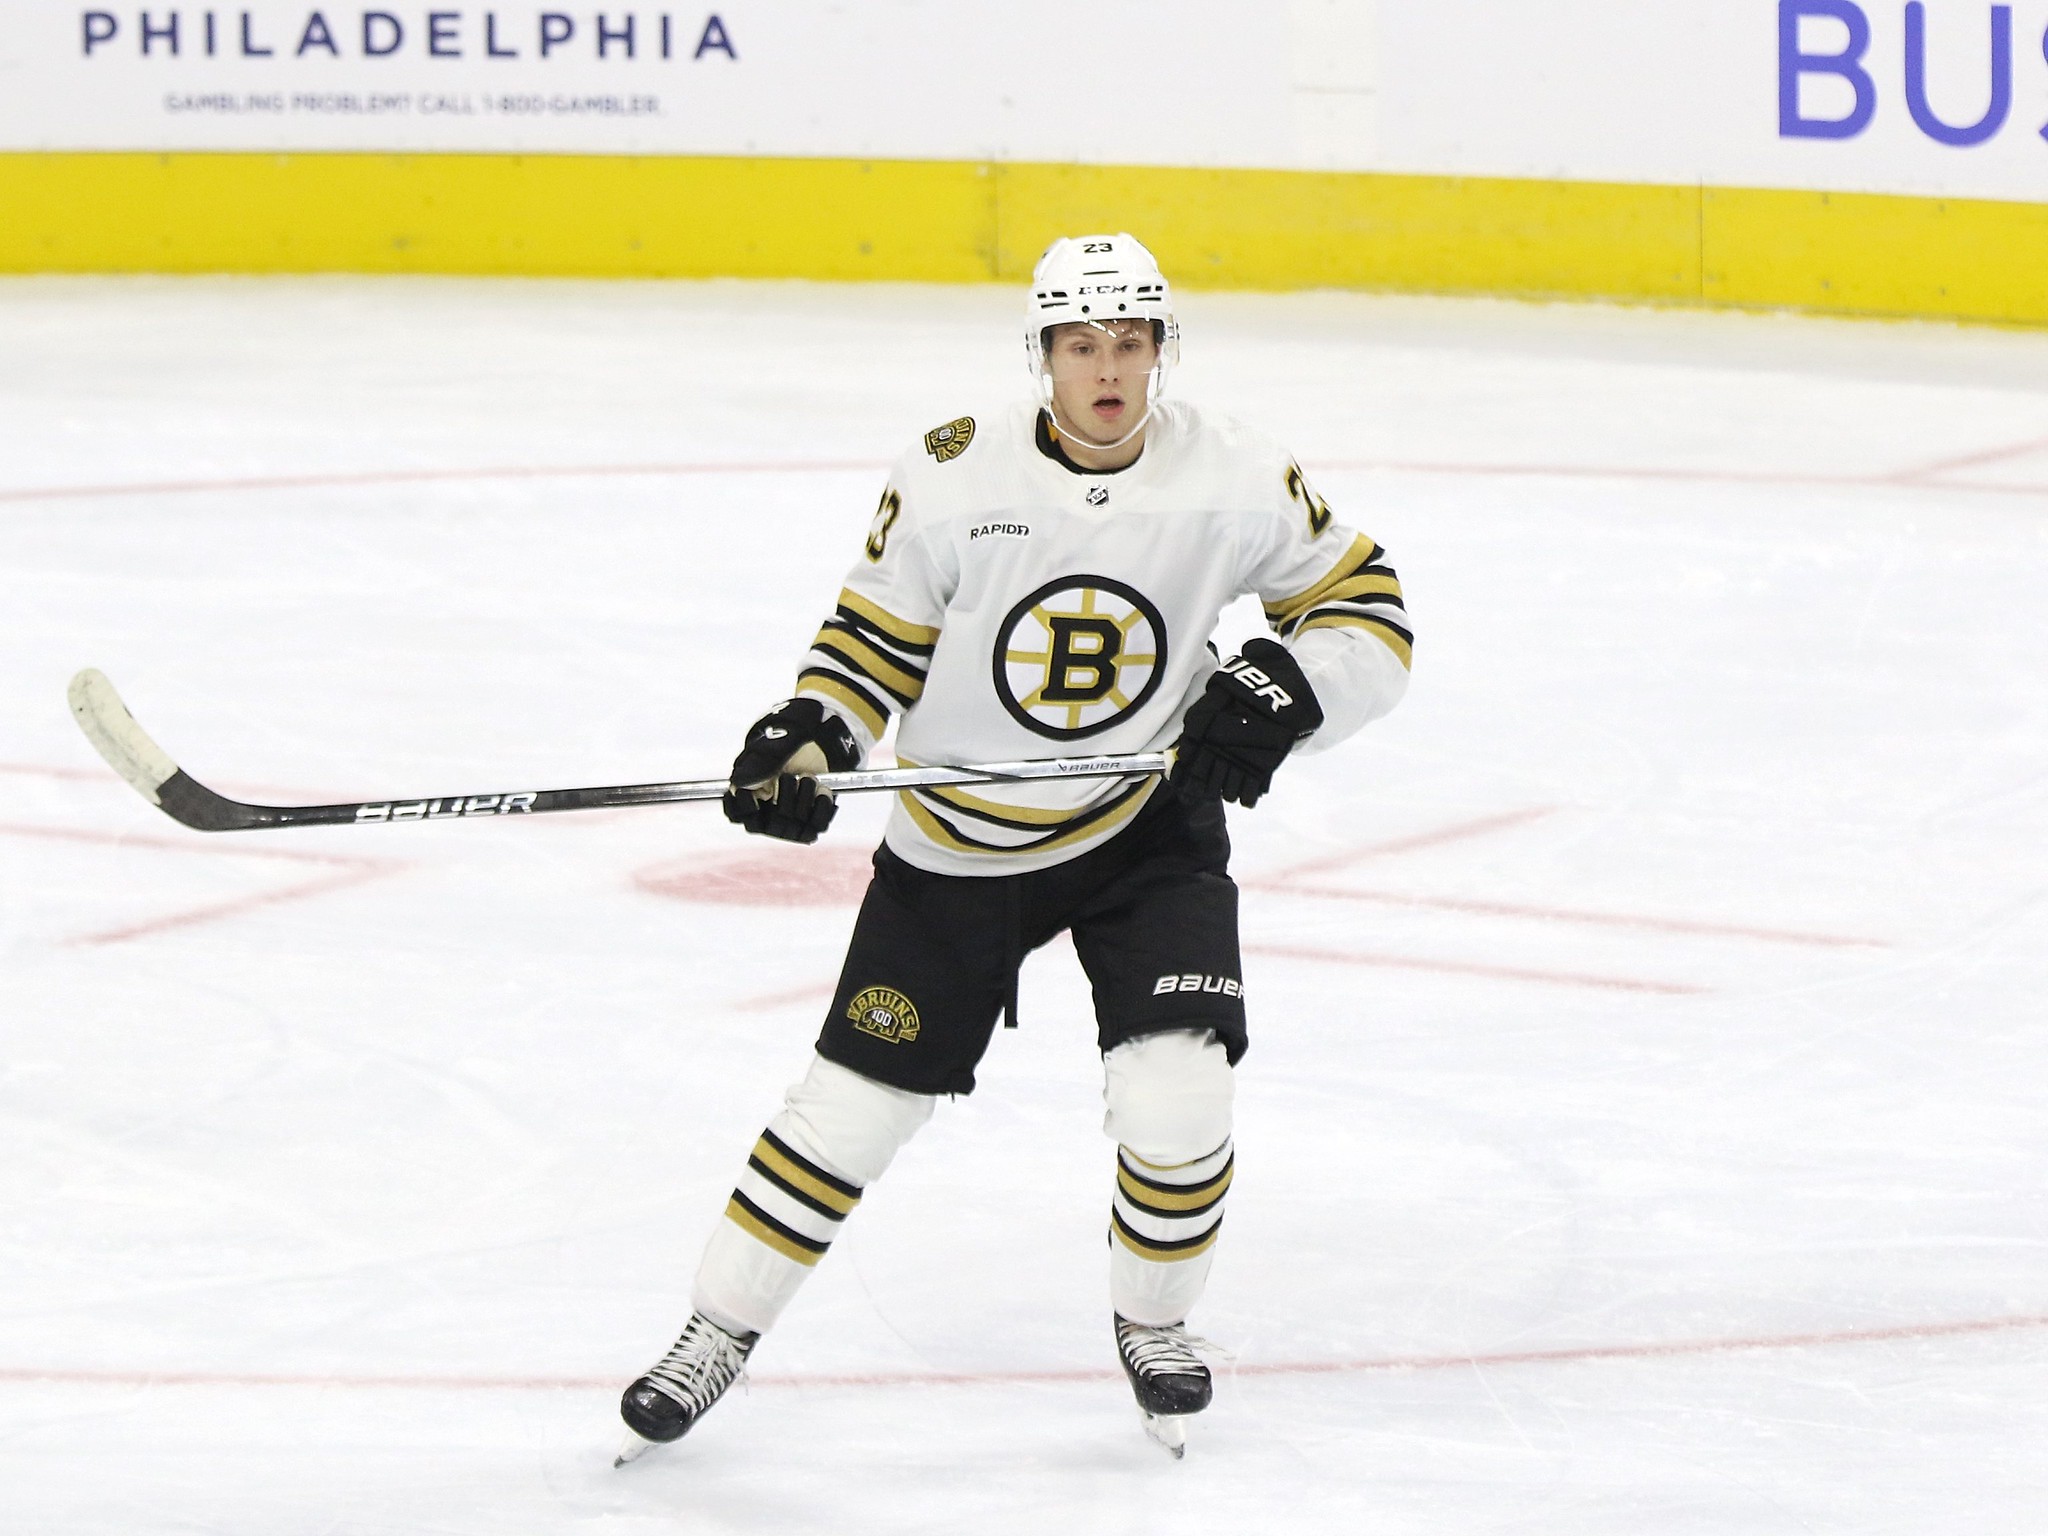 Will Poitras, Lohrei and Beecher MAKE the Bruins NHL roster